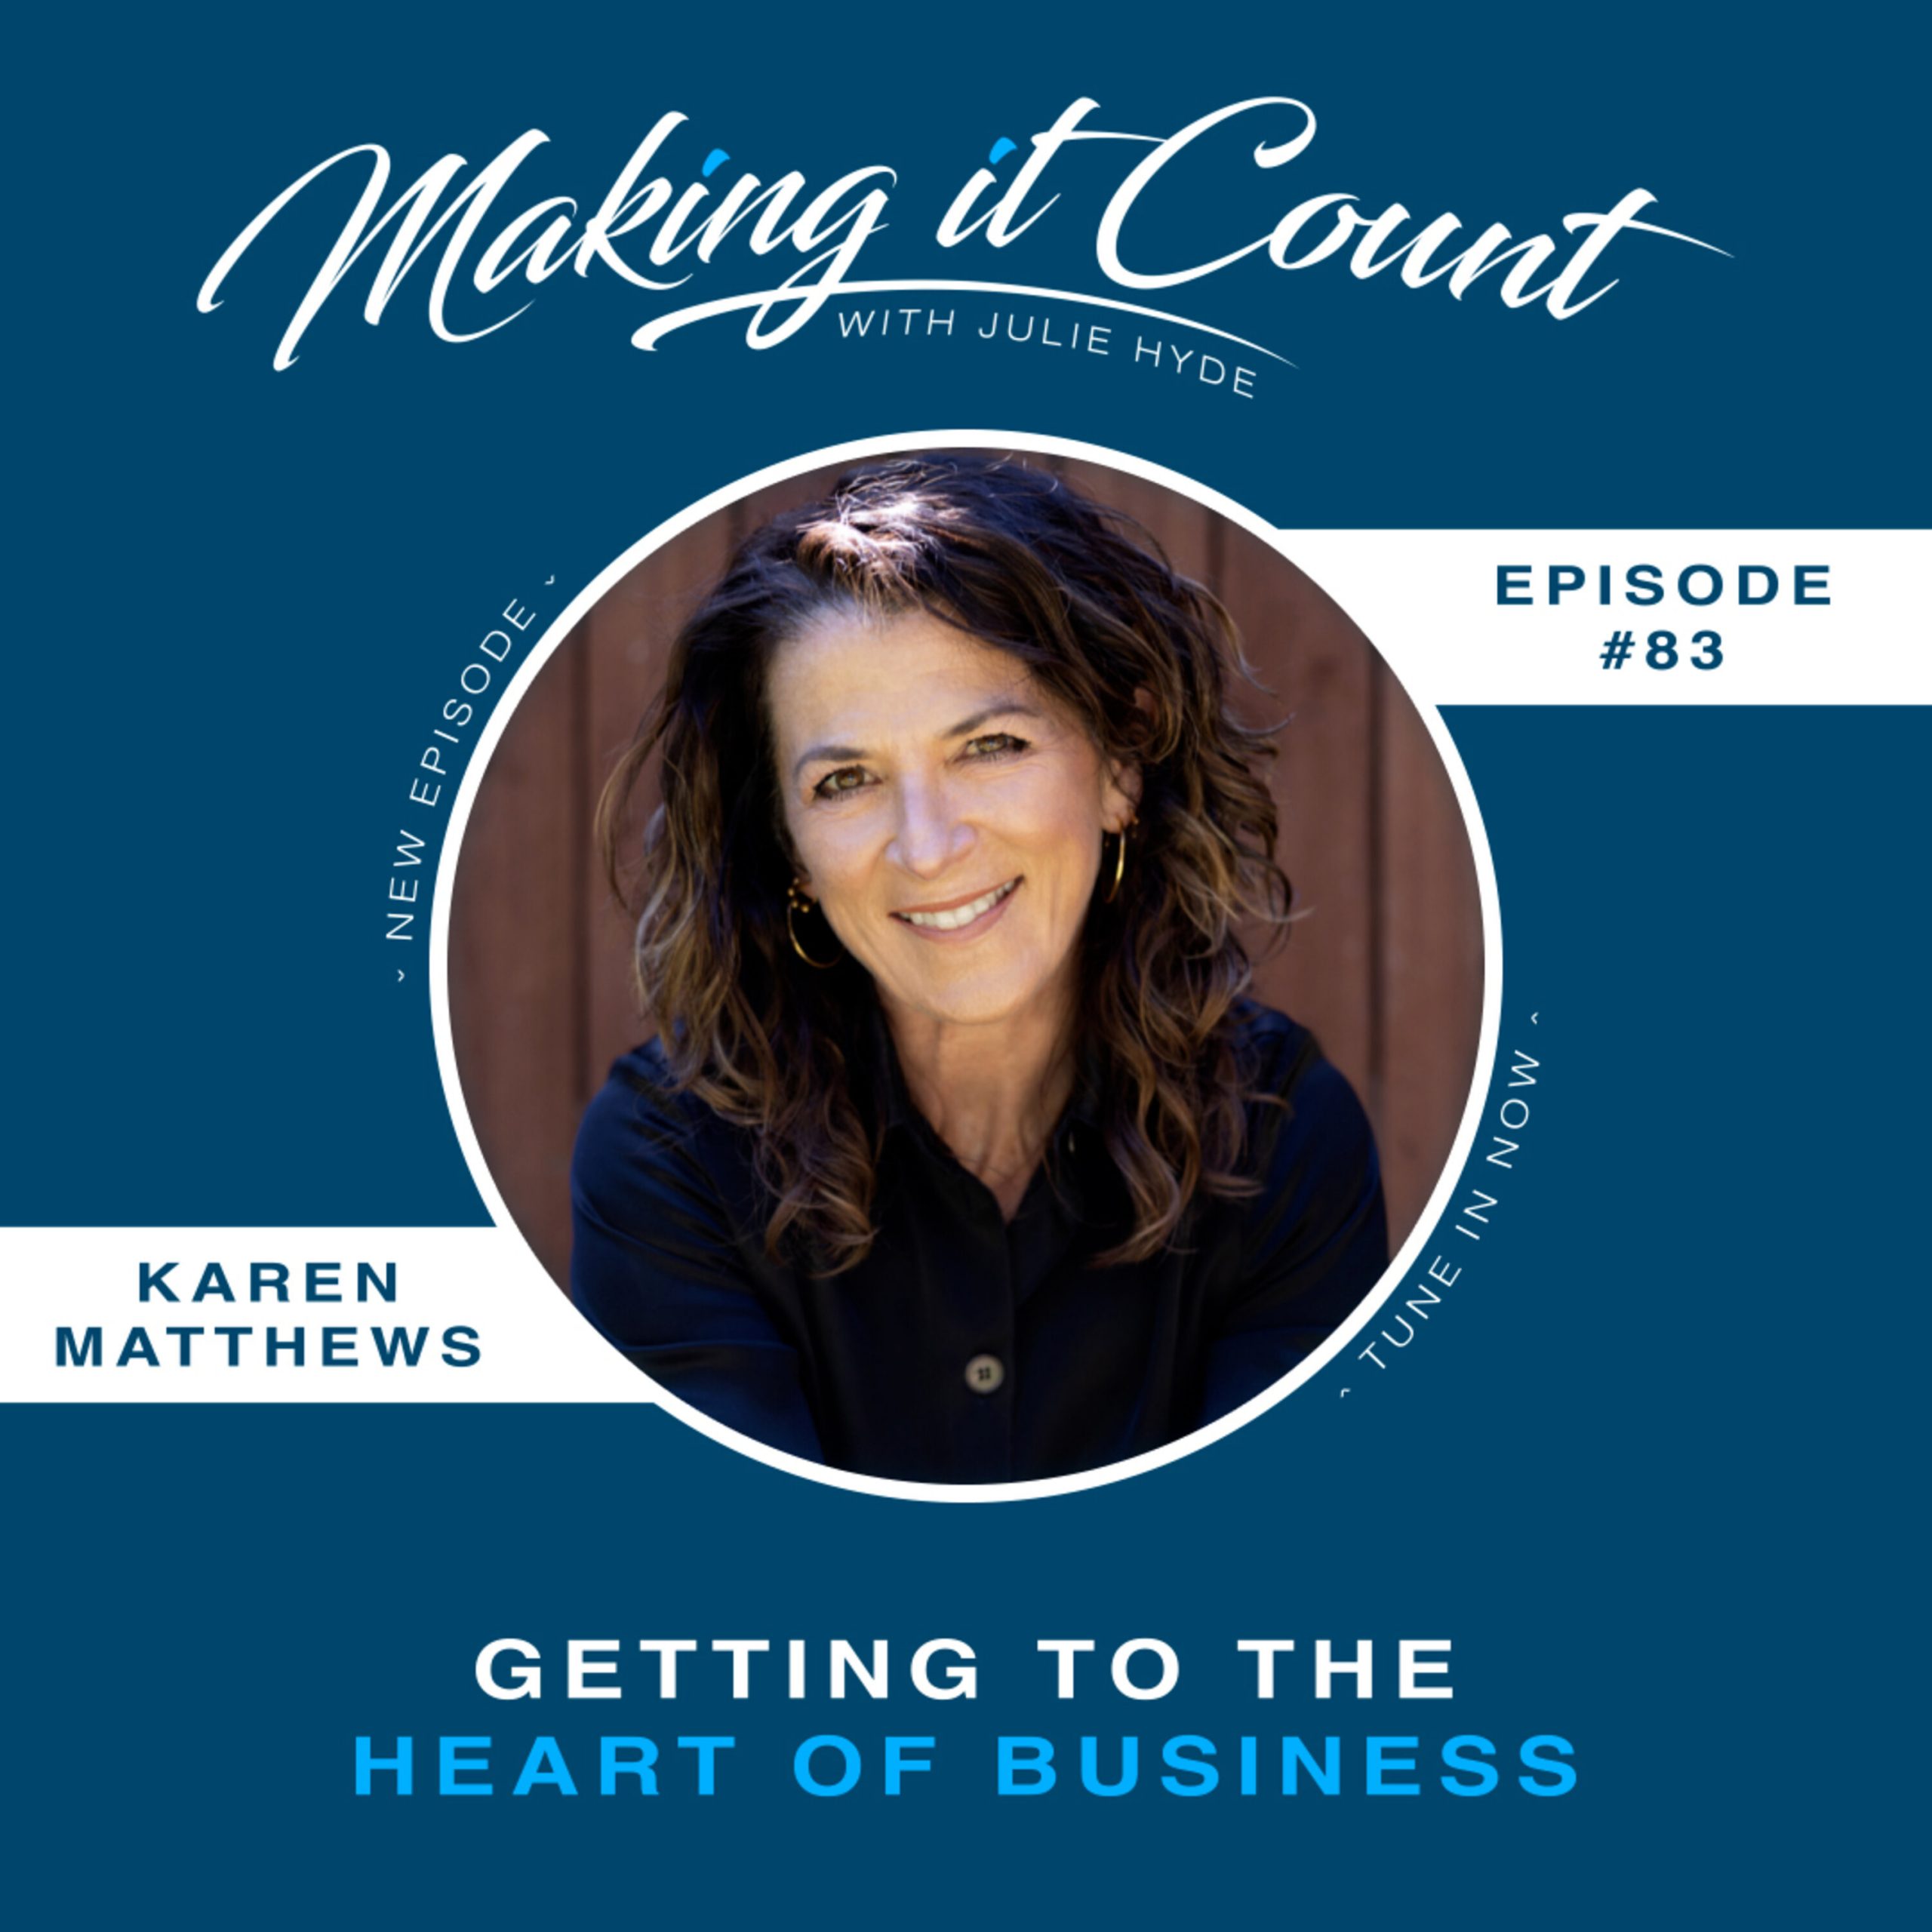 karen-matthews-getting-to-heart-of-business-julie-hyde-making-it-count-busy-leadership-leader-leaders-keynote-mindset-speaker-mentor-business-empower-lead-empowering-podcast-great-intentional-authentic-mentor-coach-role-model-top-best-inspire-engage-practical-insightful-boost-performance-tips-how-to-strategy-powerful-change-mindset-thrive-results-corporate-future-smart-program-mentorship-career-next-level-step-reconnect-control-proactive-agile-adaptable-one-on-one-woman-lady-boss-female-sydney-australia-speaker-host-guide-guidance-business-ceo-management